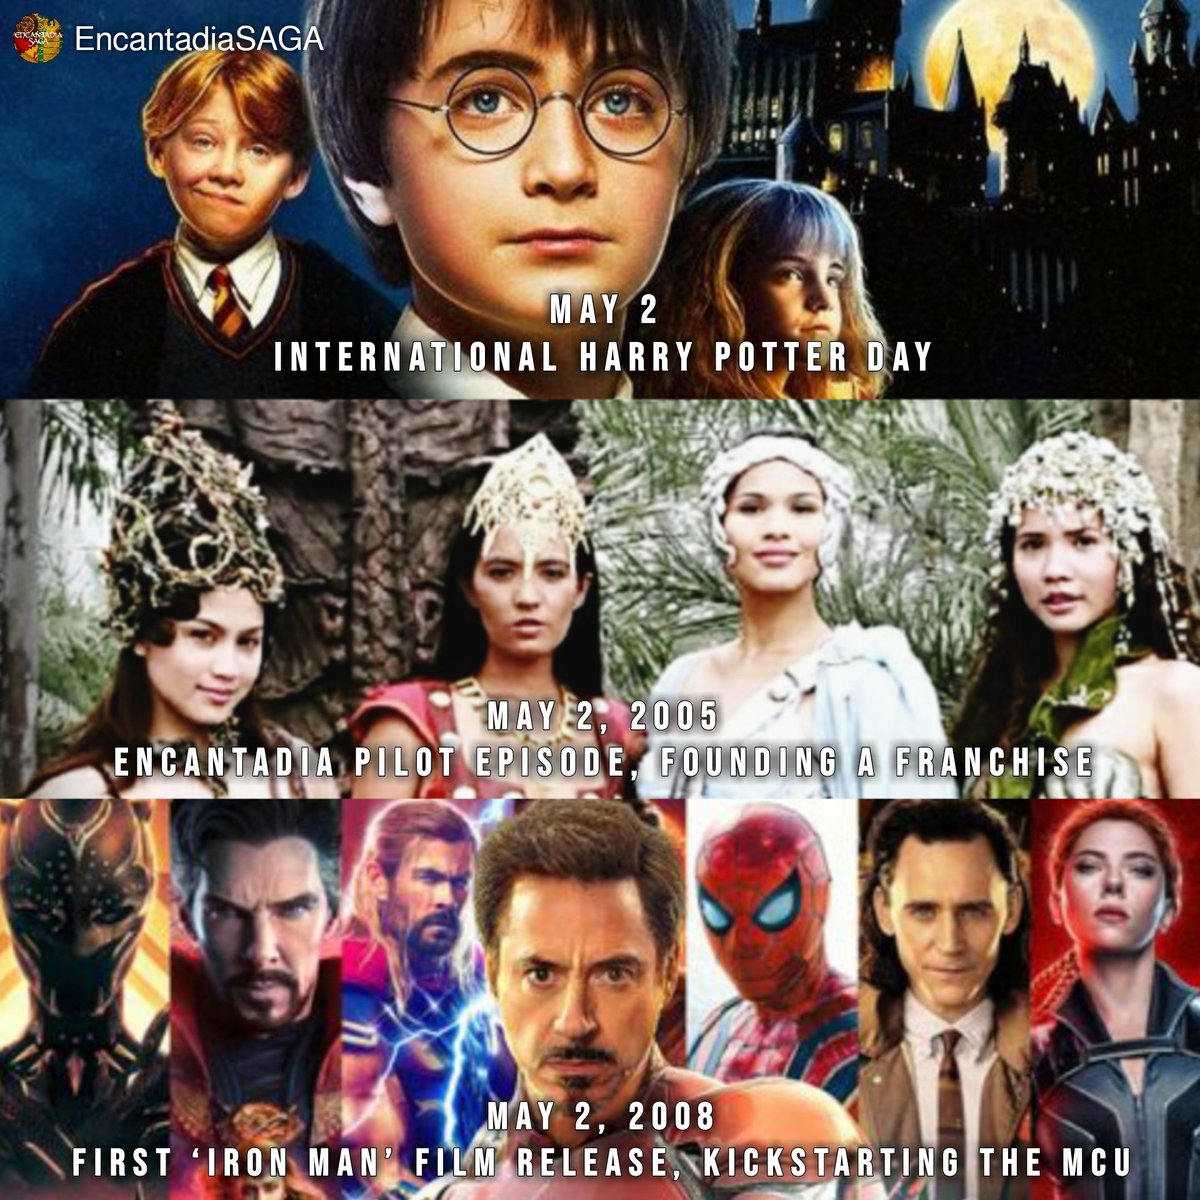 ENCANTADIA SHARES A SIGNIFICANT DAY WITH HARRY POTTER AND THE MCU

May 2 is #InternationalHarryPotterDay.

On May 2, 2005, #Encantadia aired its first episode, which since then expanded to a media franchise.

On May 2, 2008, Iron Man was released, kickstarting the